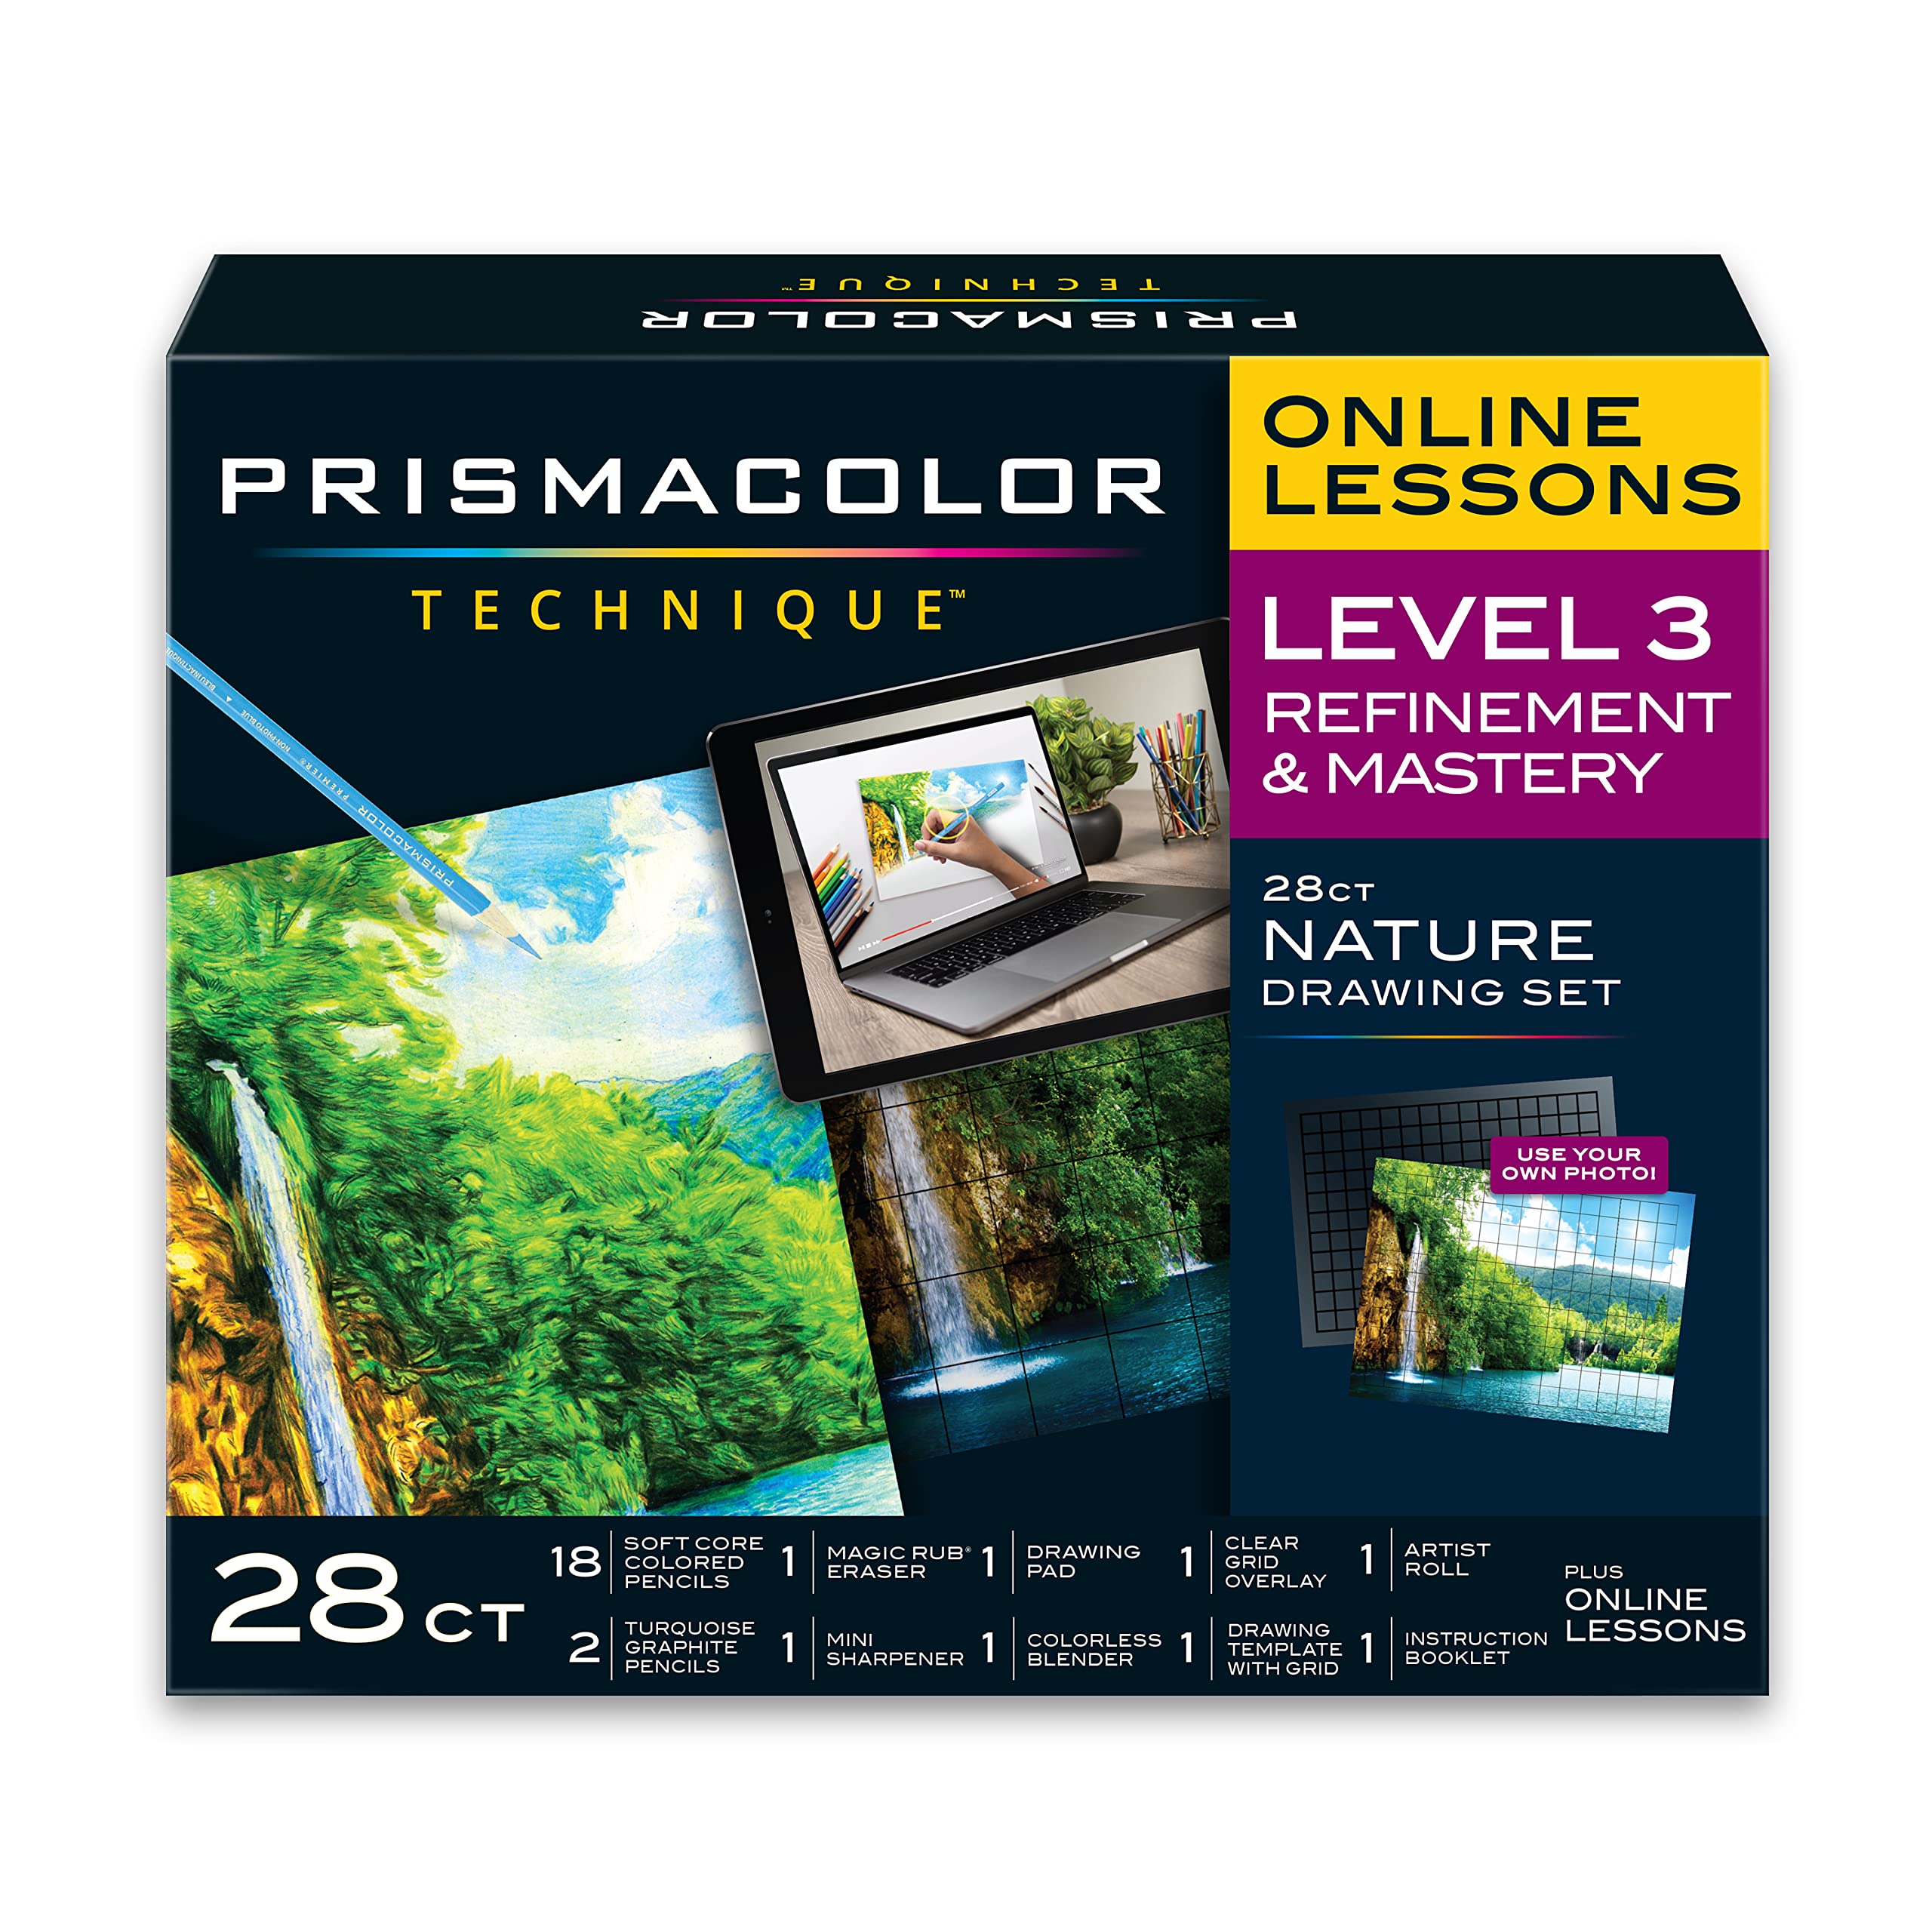 Prismacolor Technique Art Supplies and Digital Art Lessons Nature Drawing  Set Level 3 Learn to Draw with Colored Pencils and More Includes Artist  Roll Case Waterfall Landscape Drawing 28 Count Nature Level 3